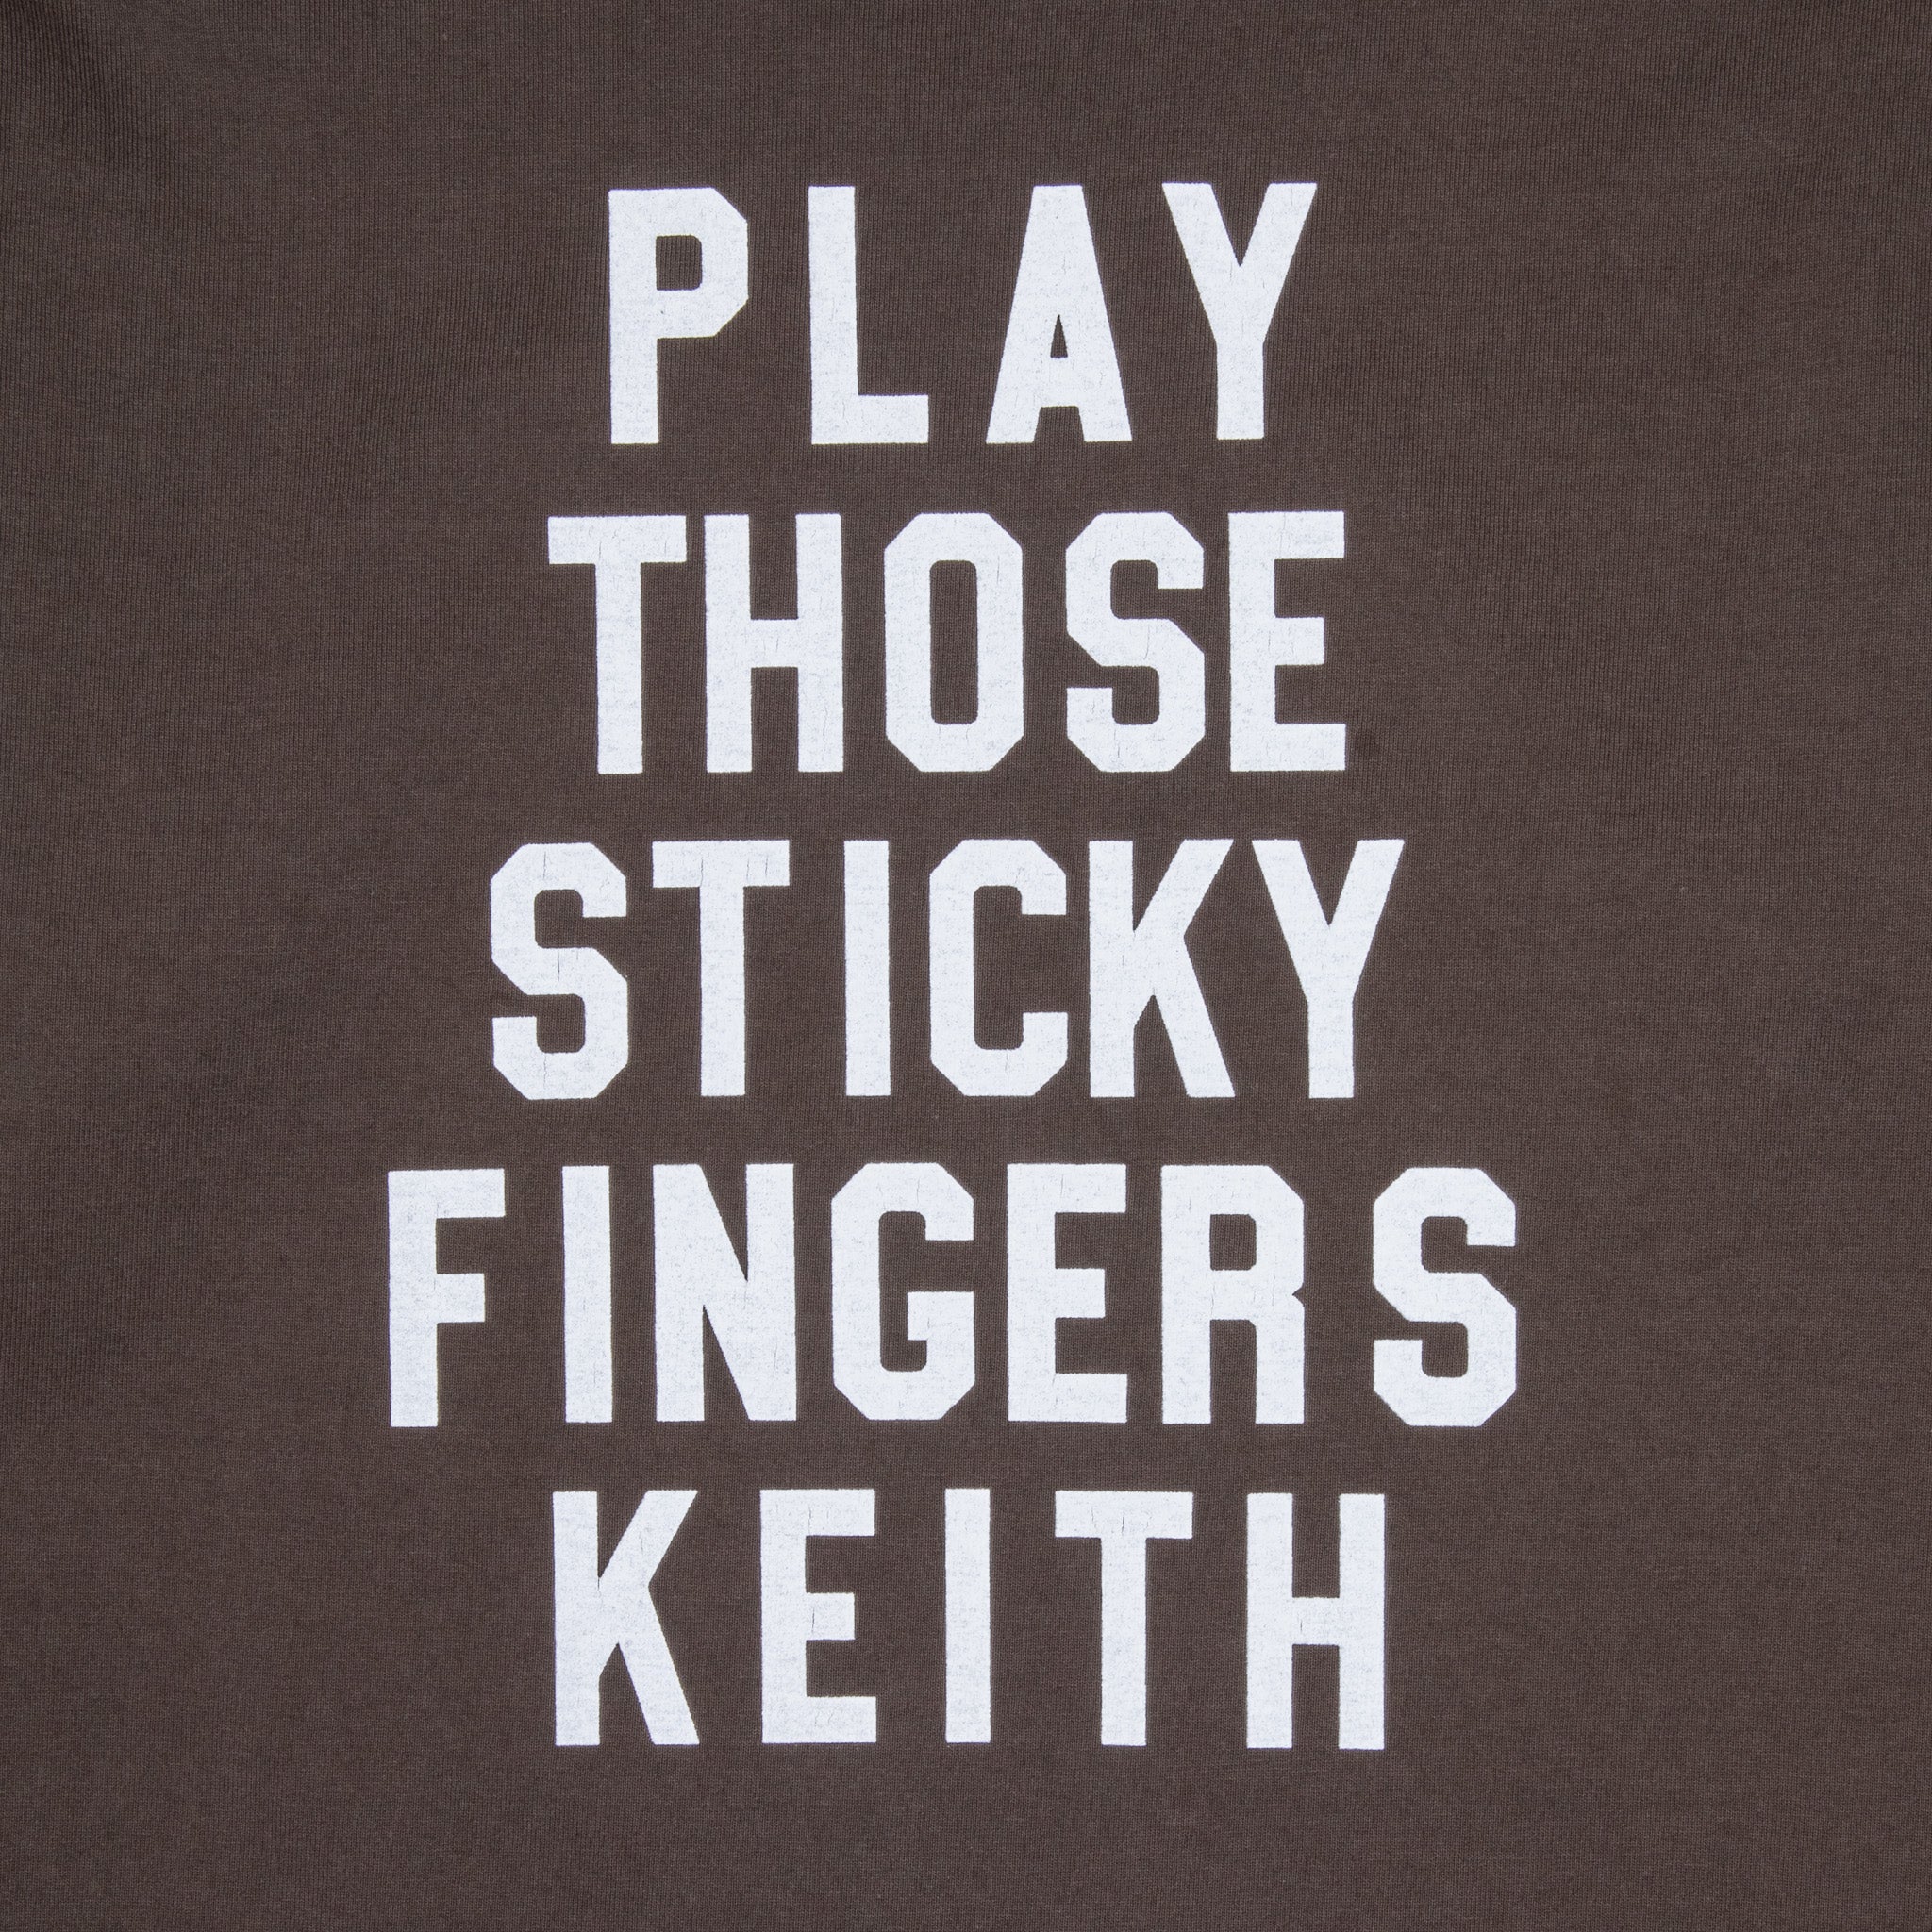 The Real McCoy&#39;s Football T-Shirt Sticky Fingers Charcoal